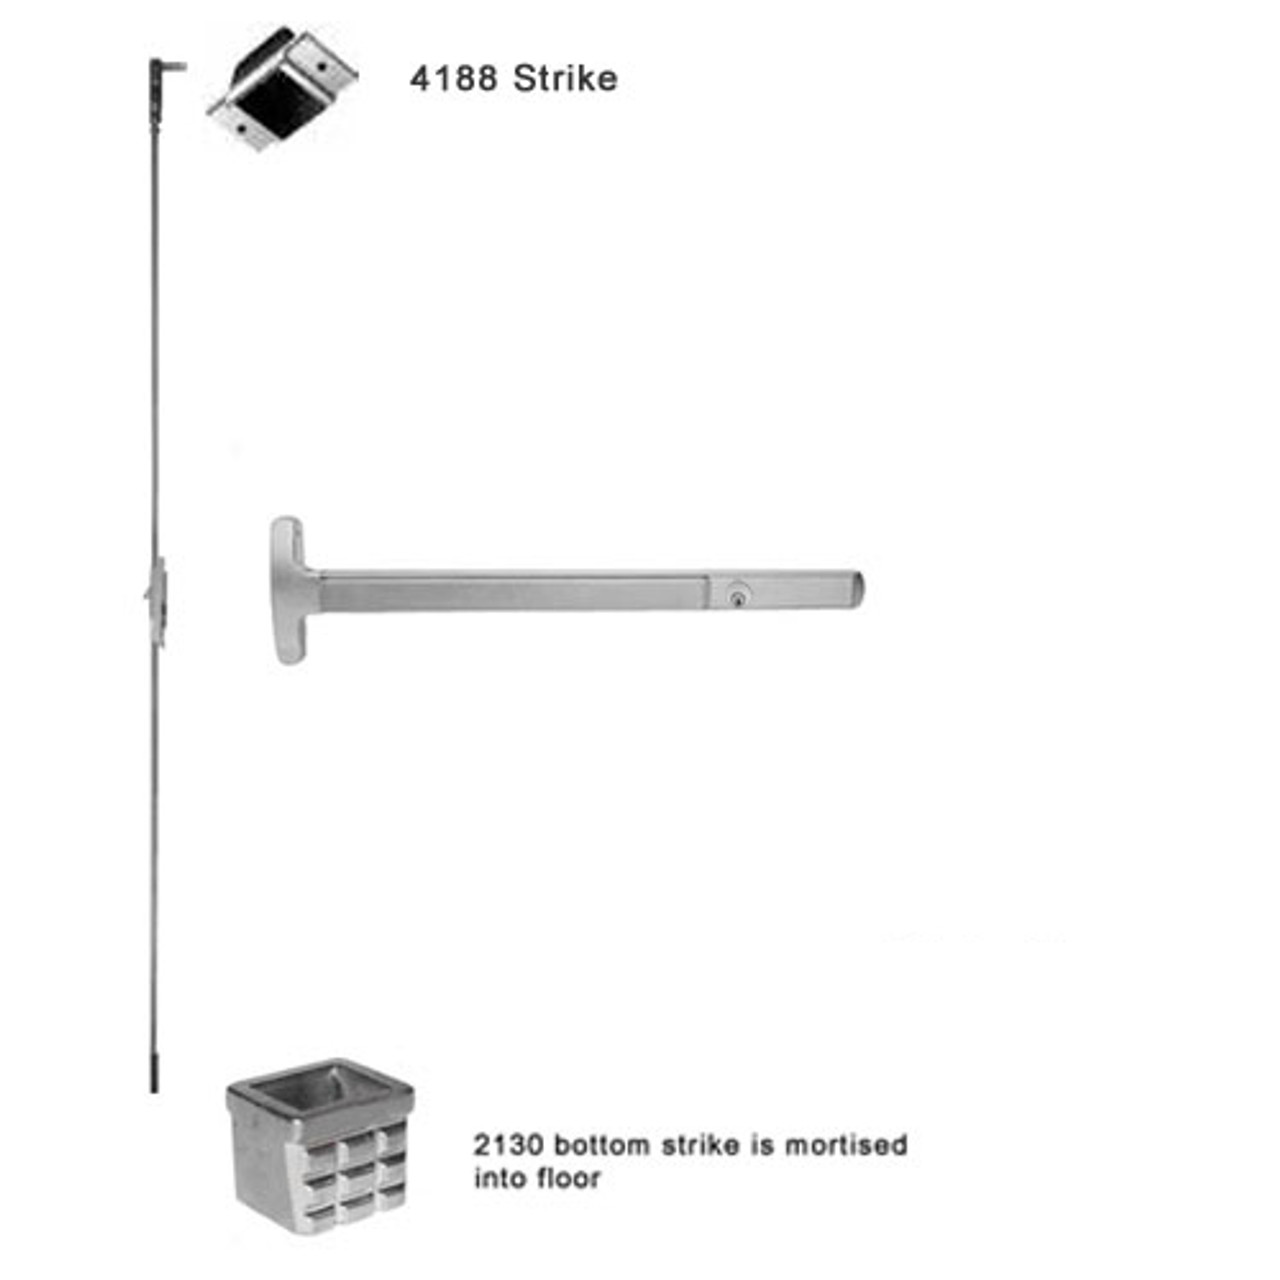 CD24-C-L-NL-DANE-US28-4-LHR Falcon 24 Series Concealed Vertical Rod Device 712L-NL Dane Lever with Night Latch Trim in Anodized Aluminum